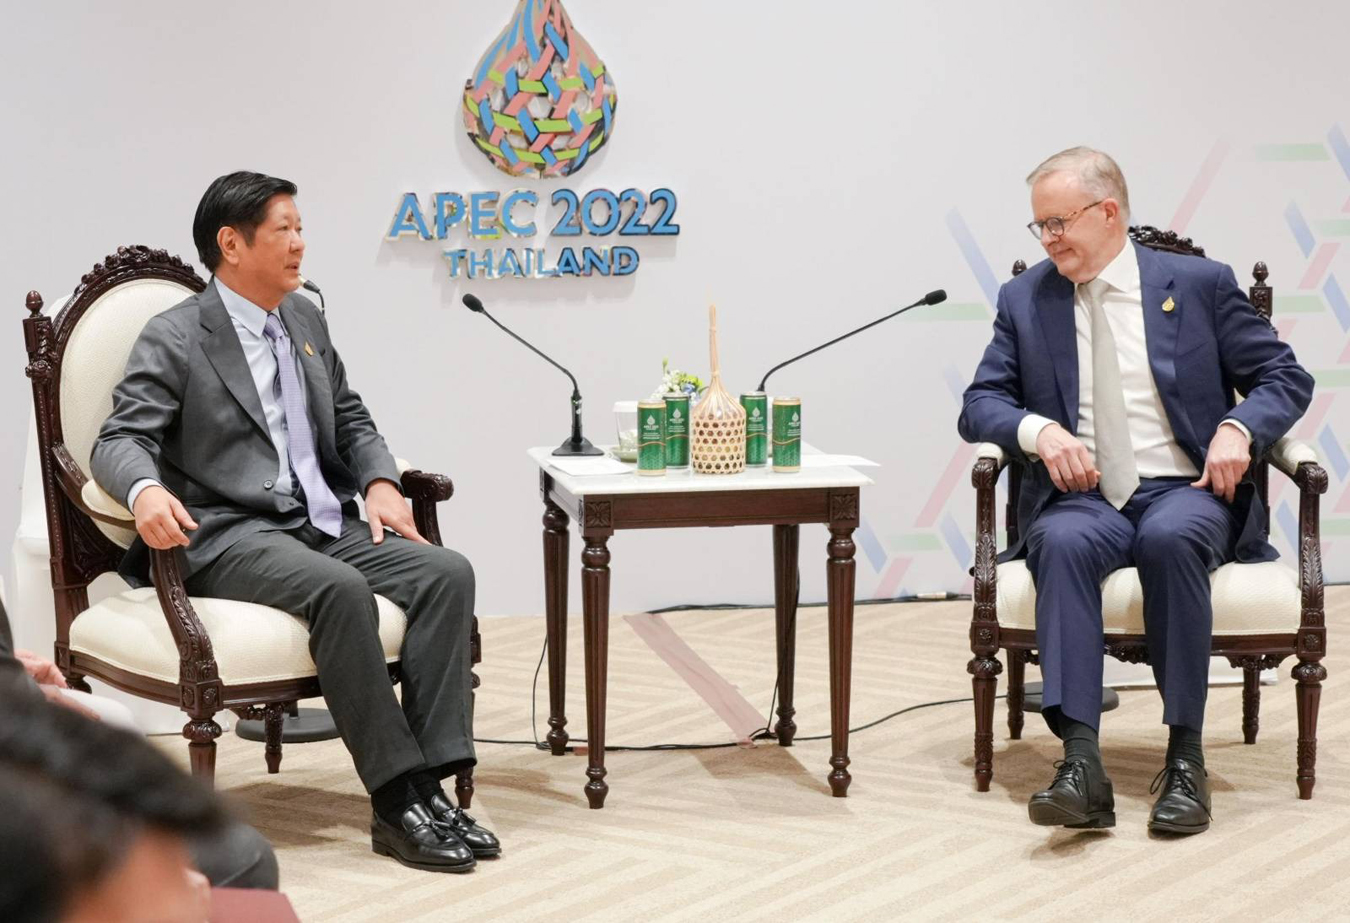 Australia Prime Minister Anthony Albanese on Saturday lauded the Philippines and Australia's good economic and people-to-people relations in his historic meeting with President Ferdinand R. Marcos Jr. in Bangkok.